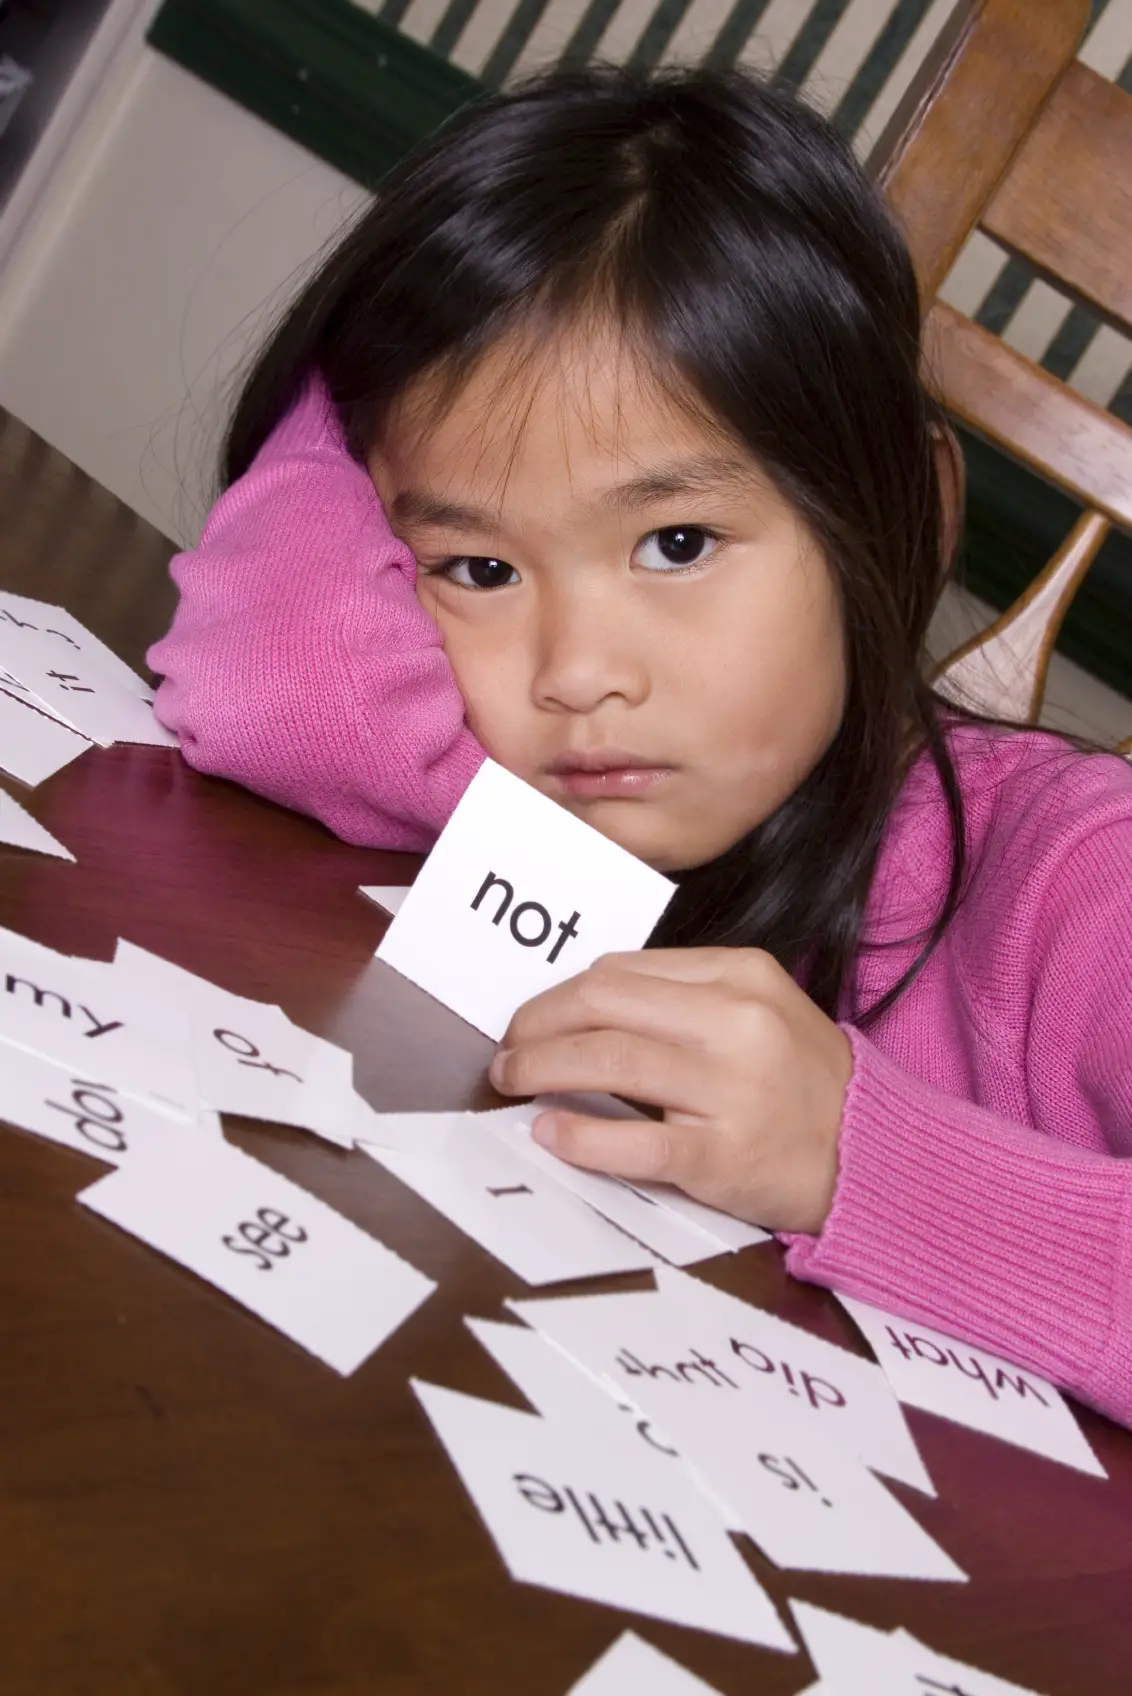 Sad young girl using flash cards learning vocabulary